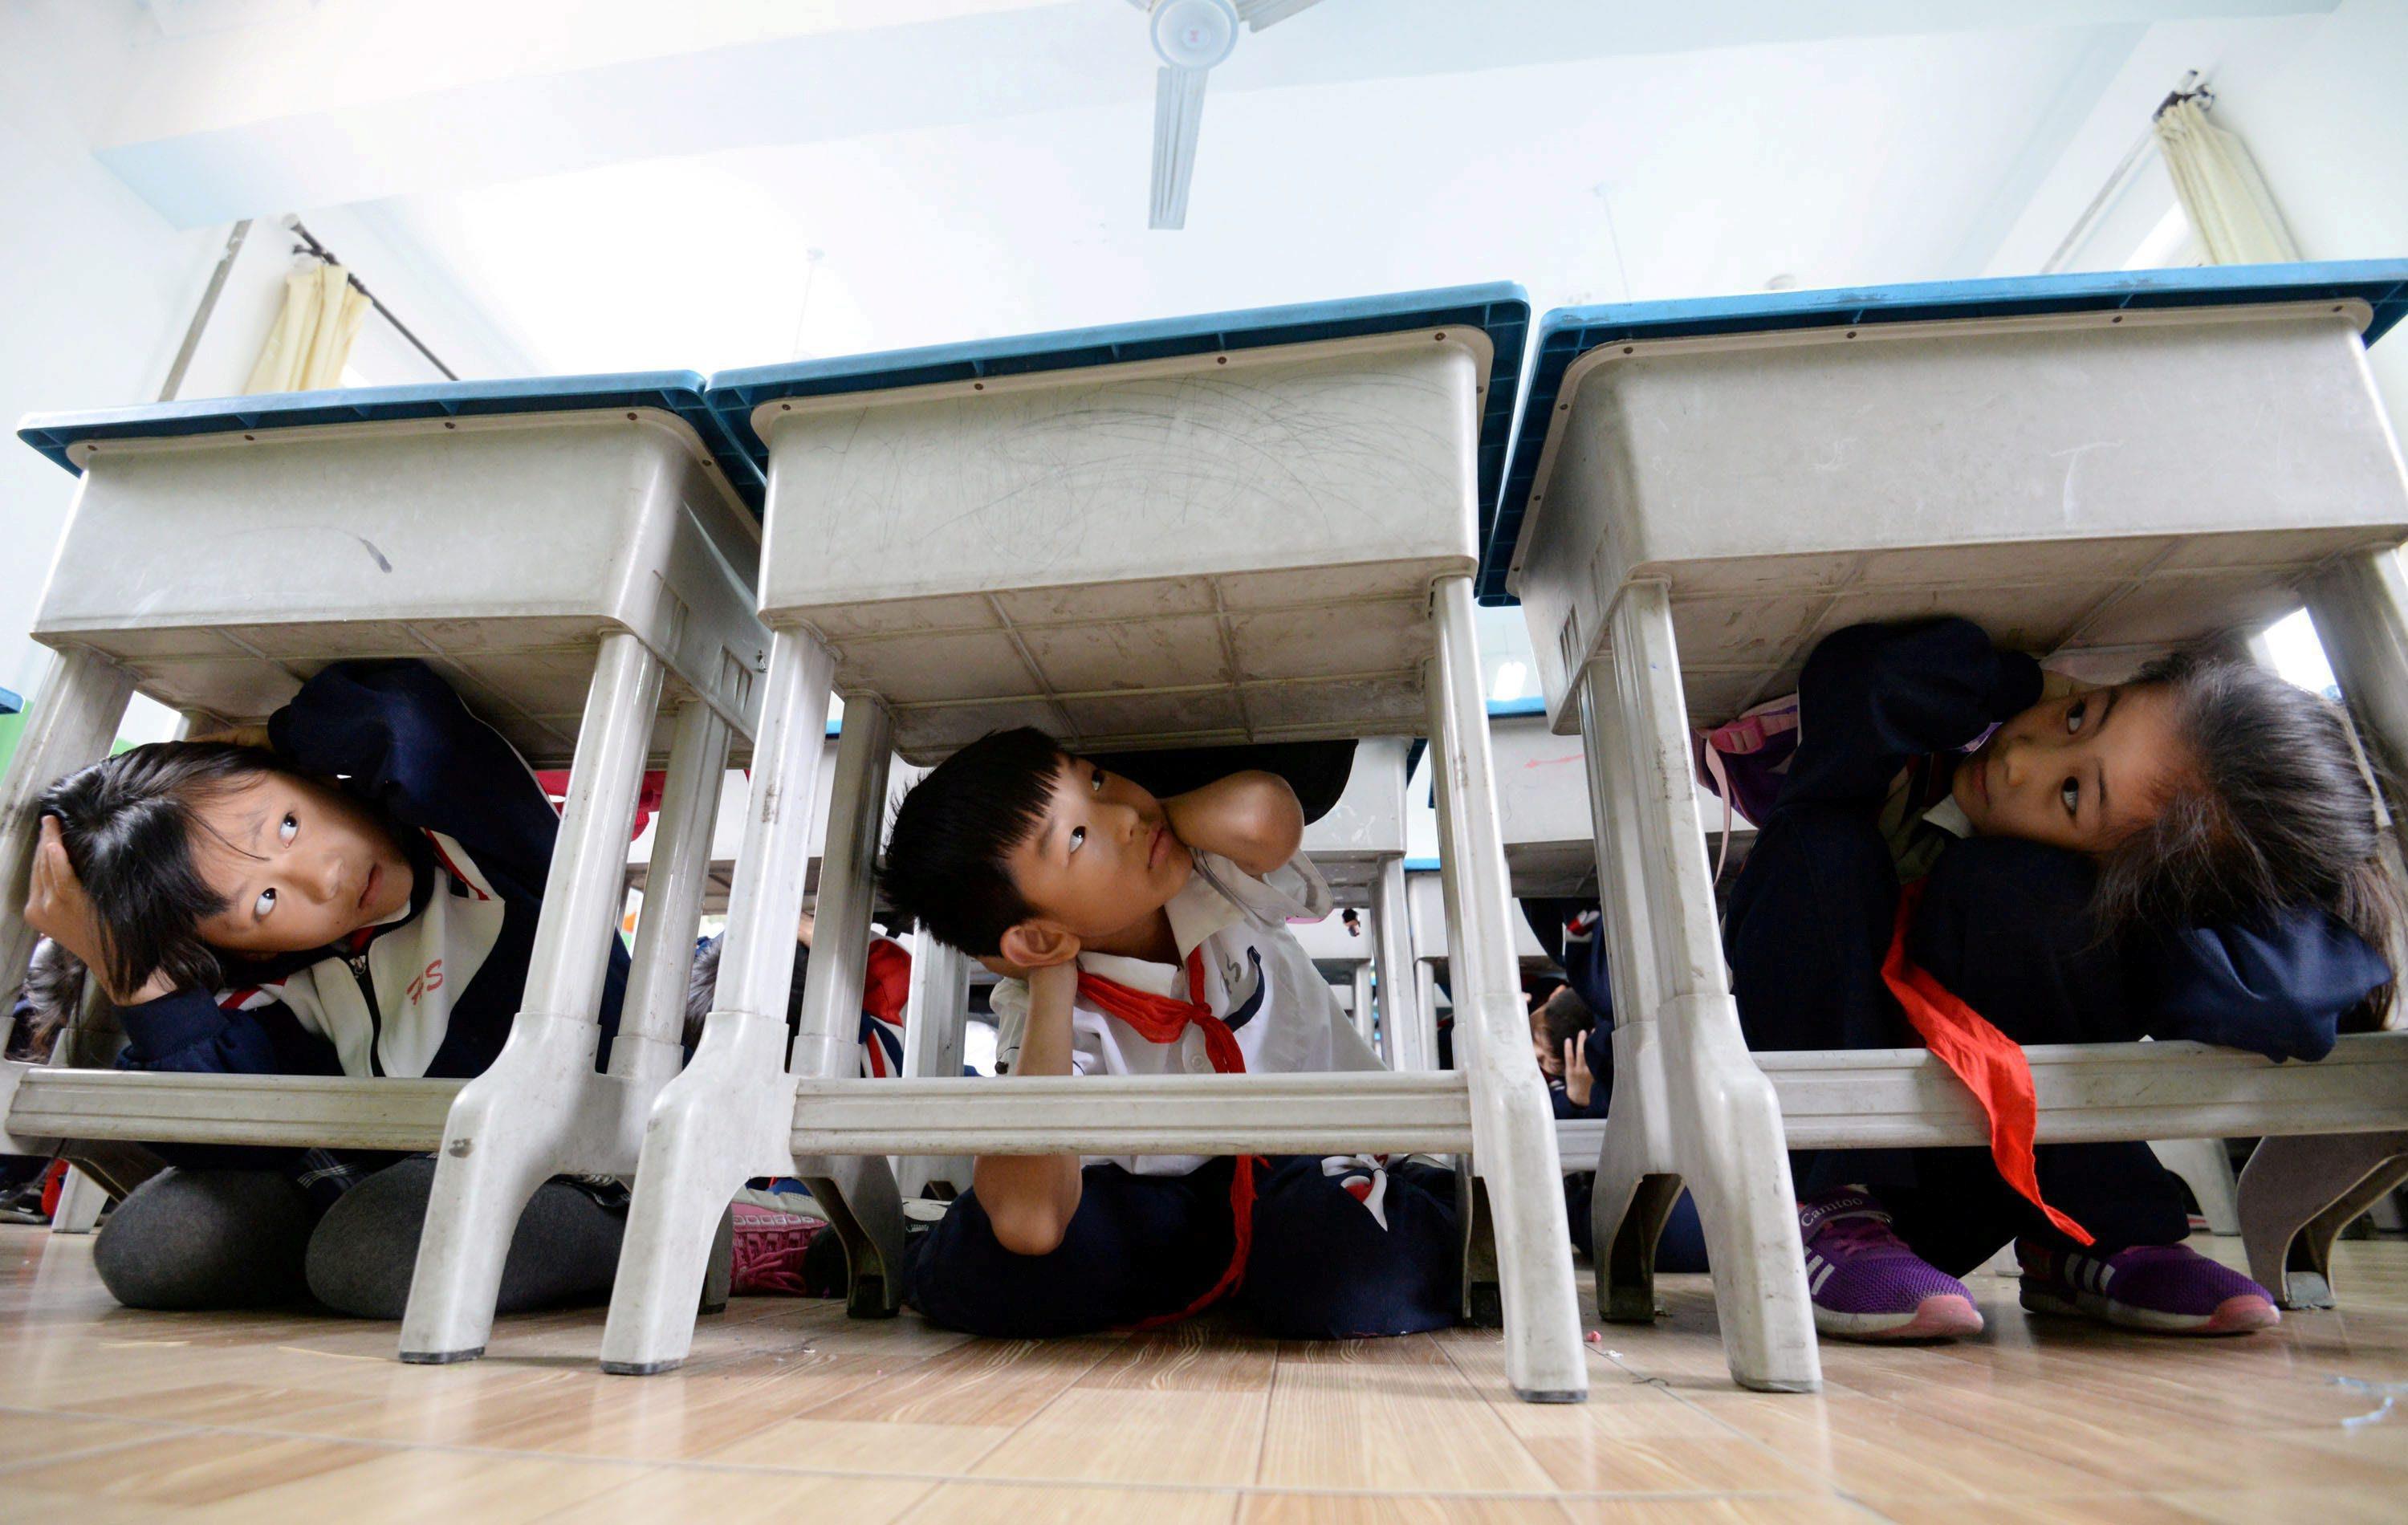 Primary school students take part in an earthquake drill ahead of the 10th anniversary of the 2008 S